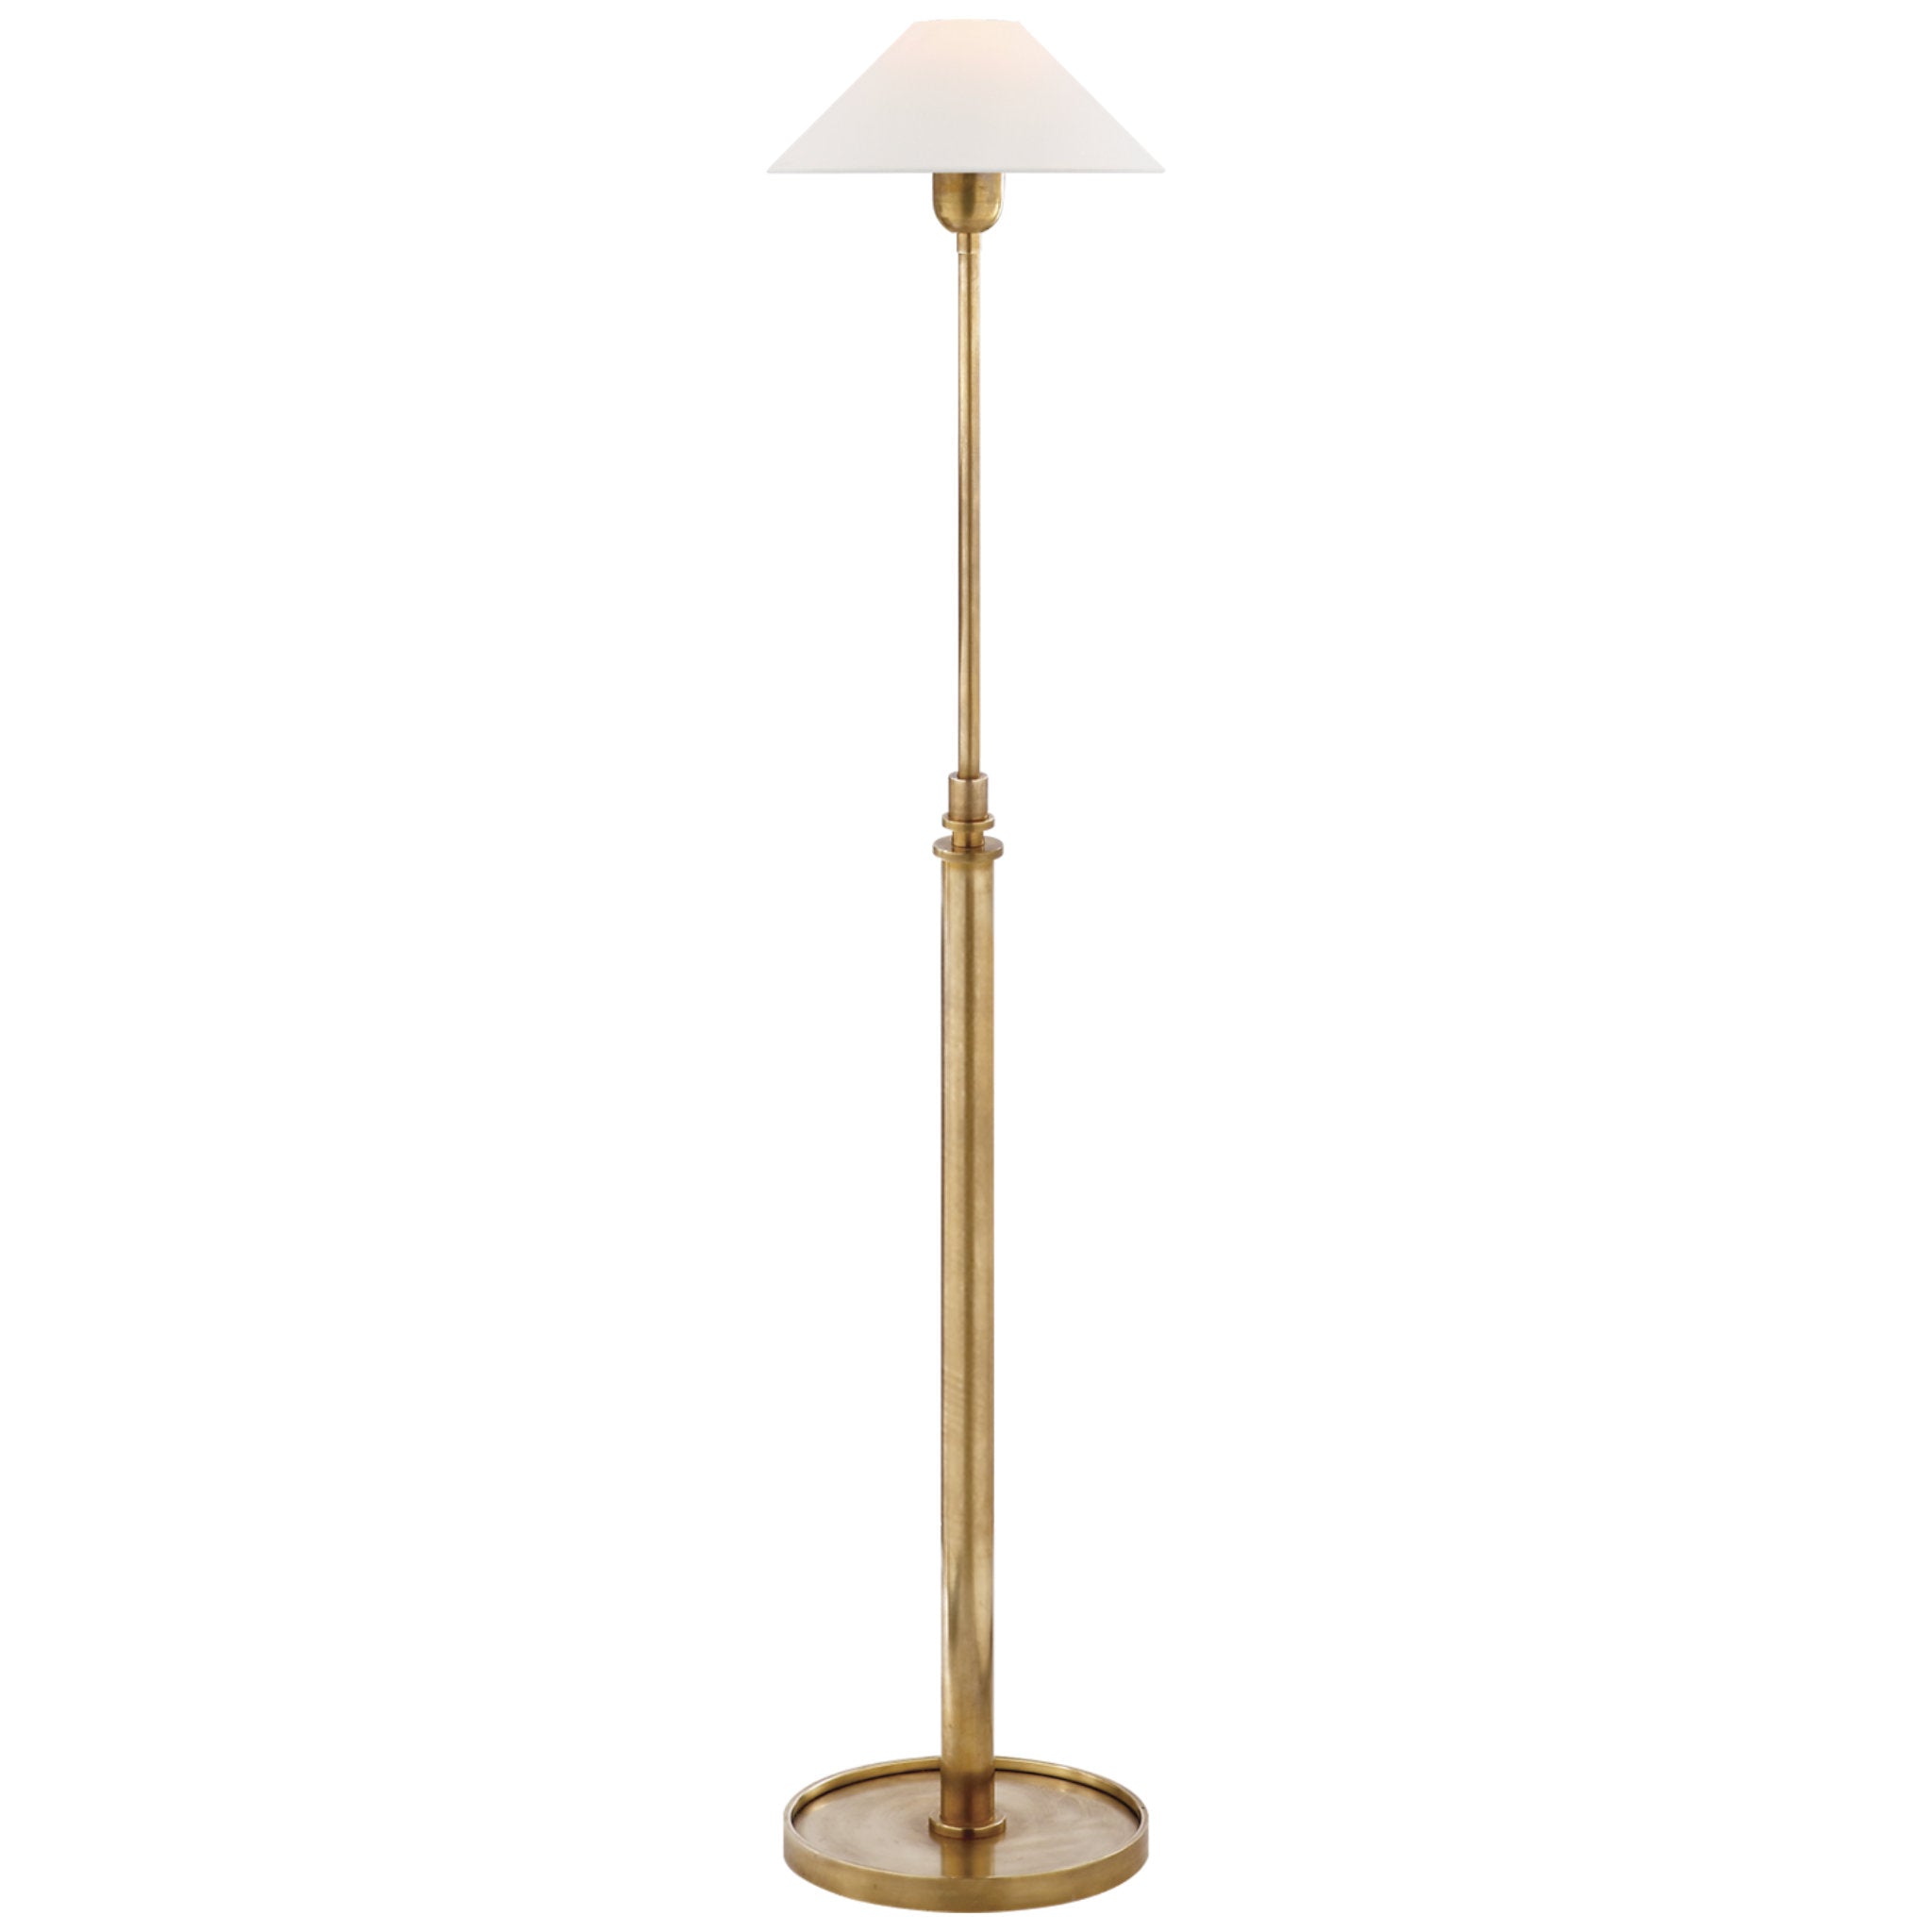 J. Randall Powers Hargett Floor Lamp in Hand-Rubbed Antique Brass with Linen Shade